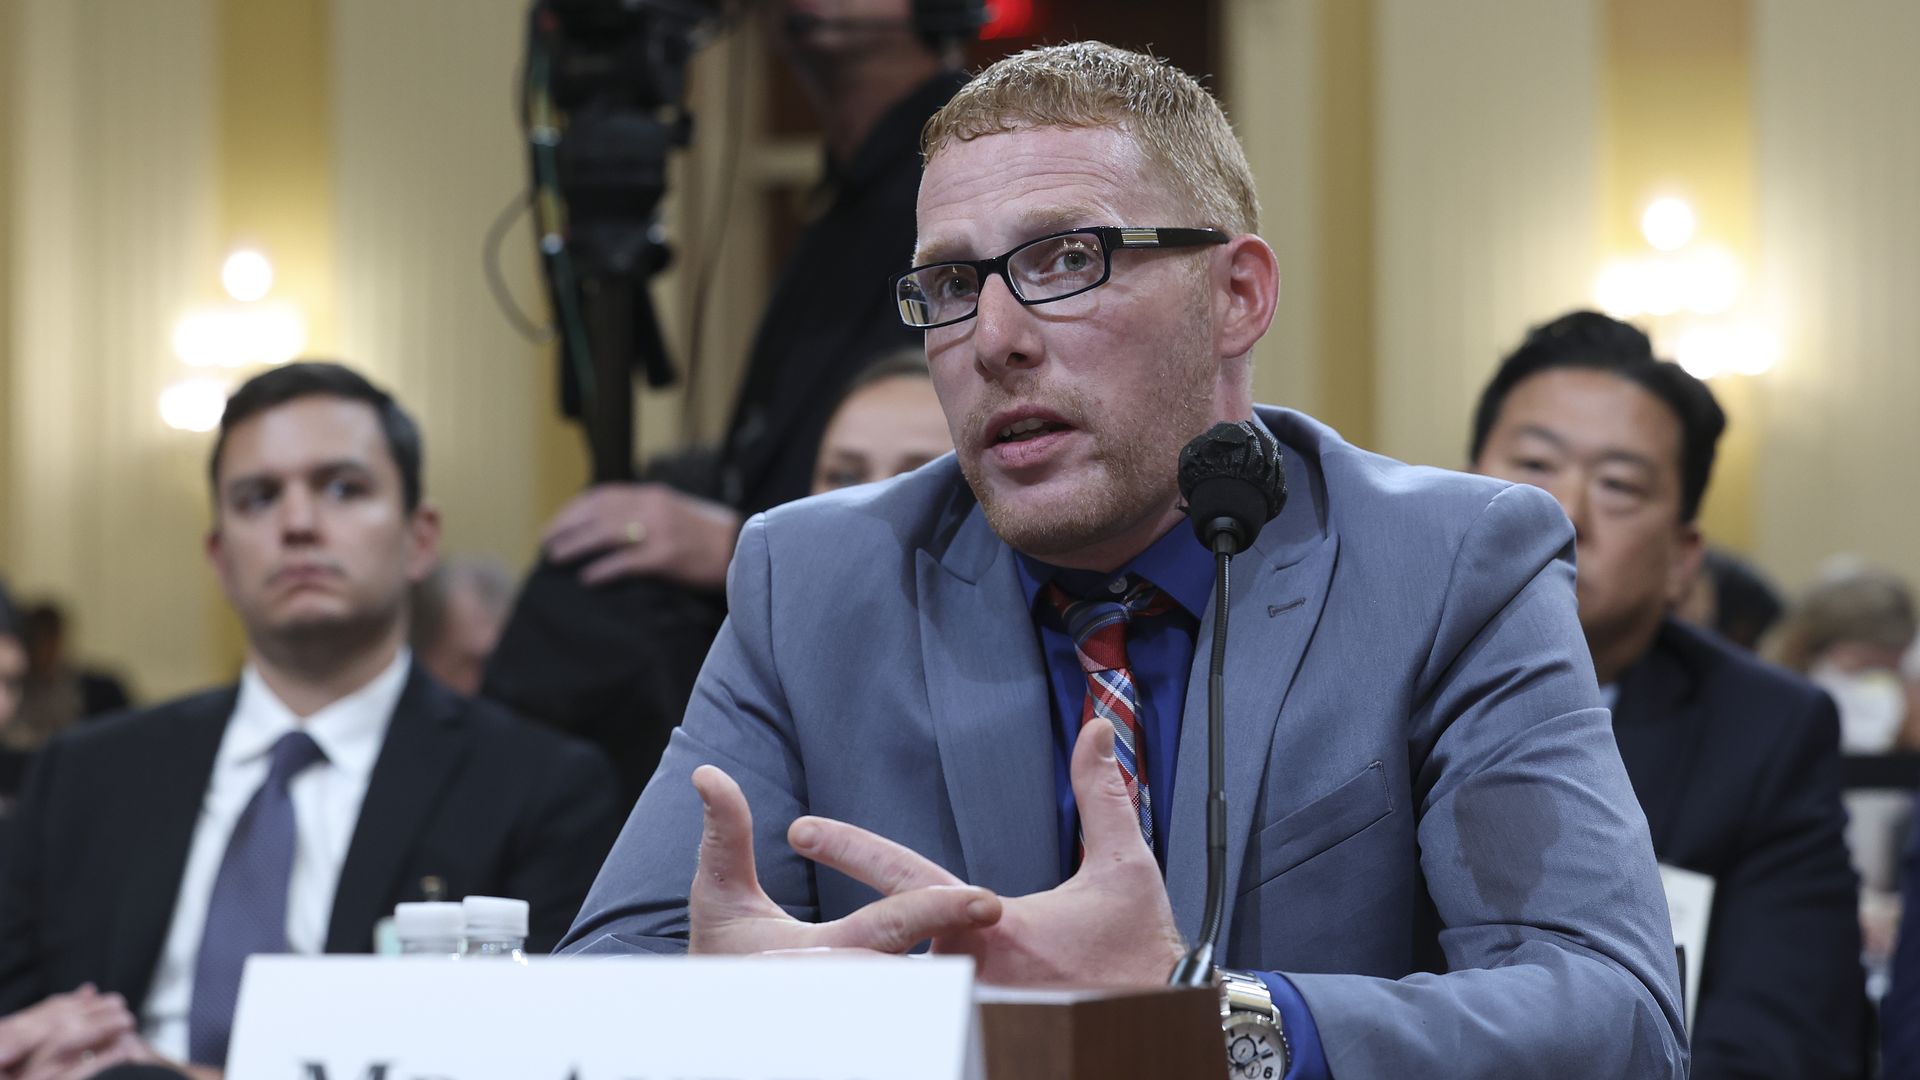 Stephen Ayres, who entered the U.S. Capitol illegally on January 6, 2021, testifies during the seventh hearing by the House Select Committee